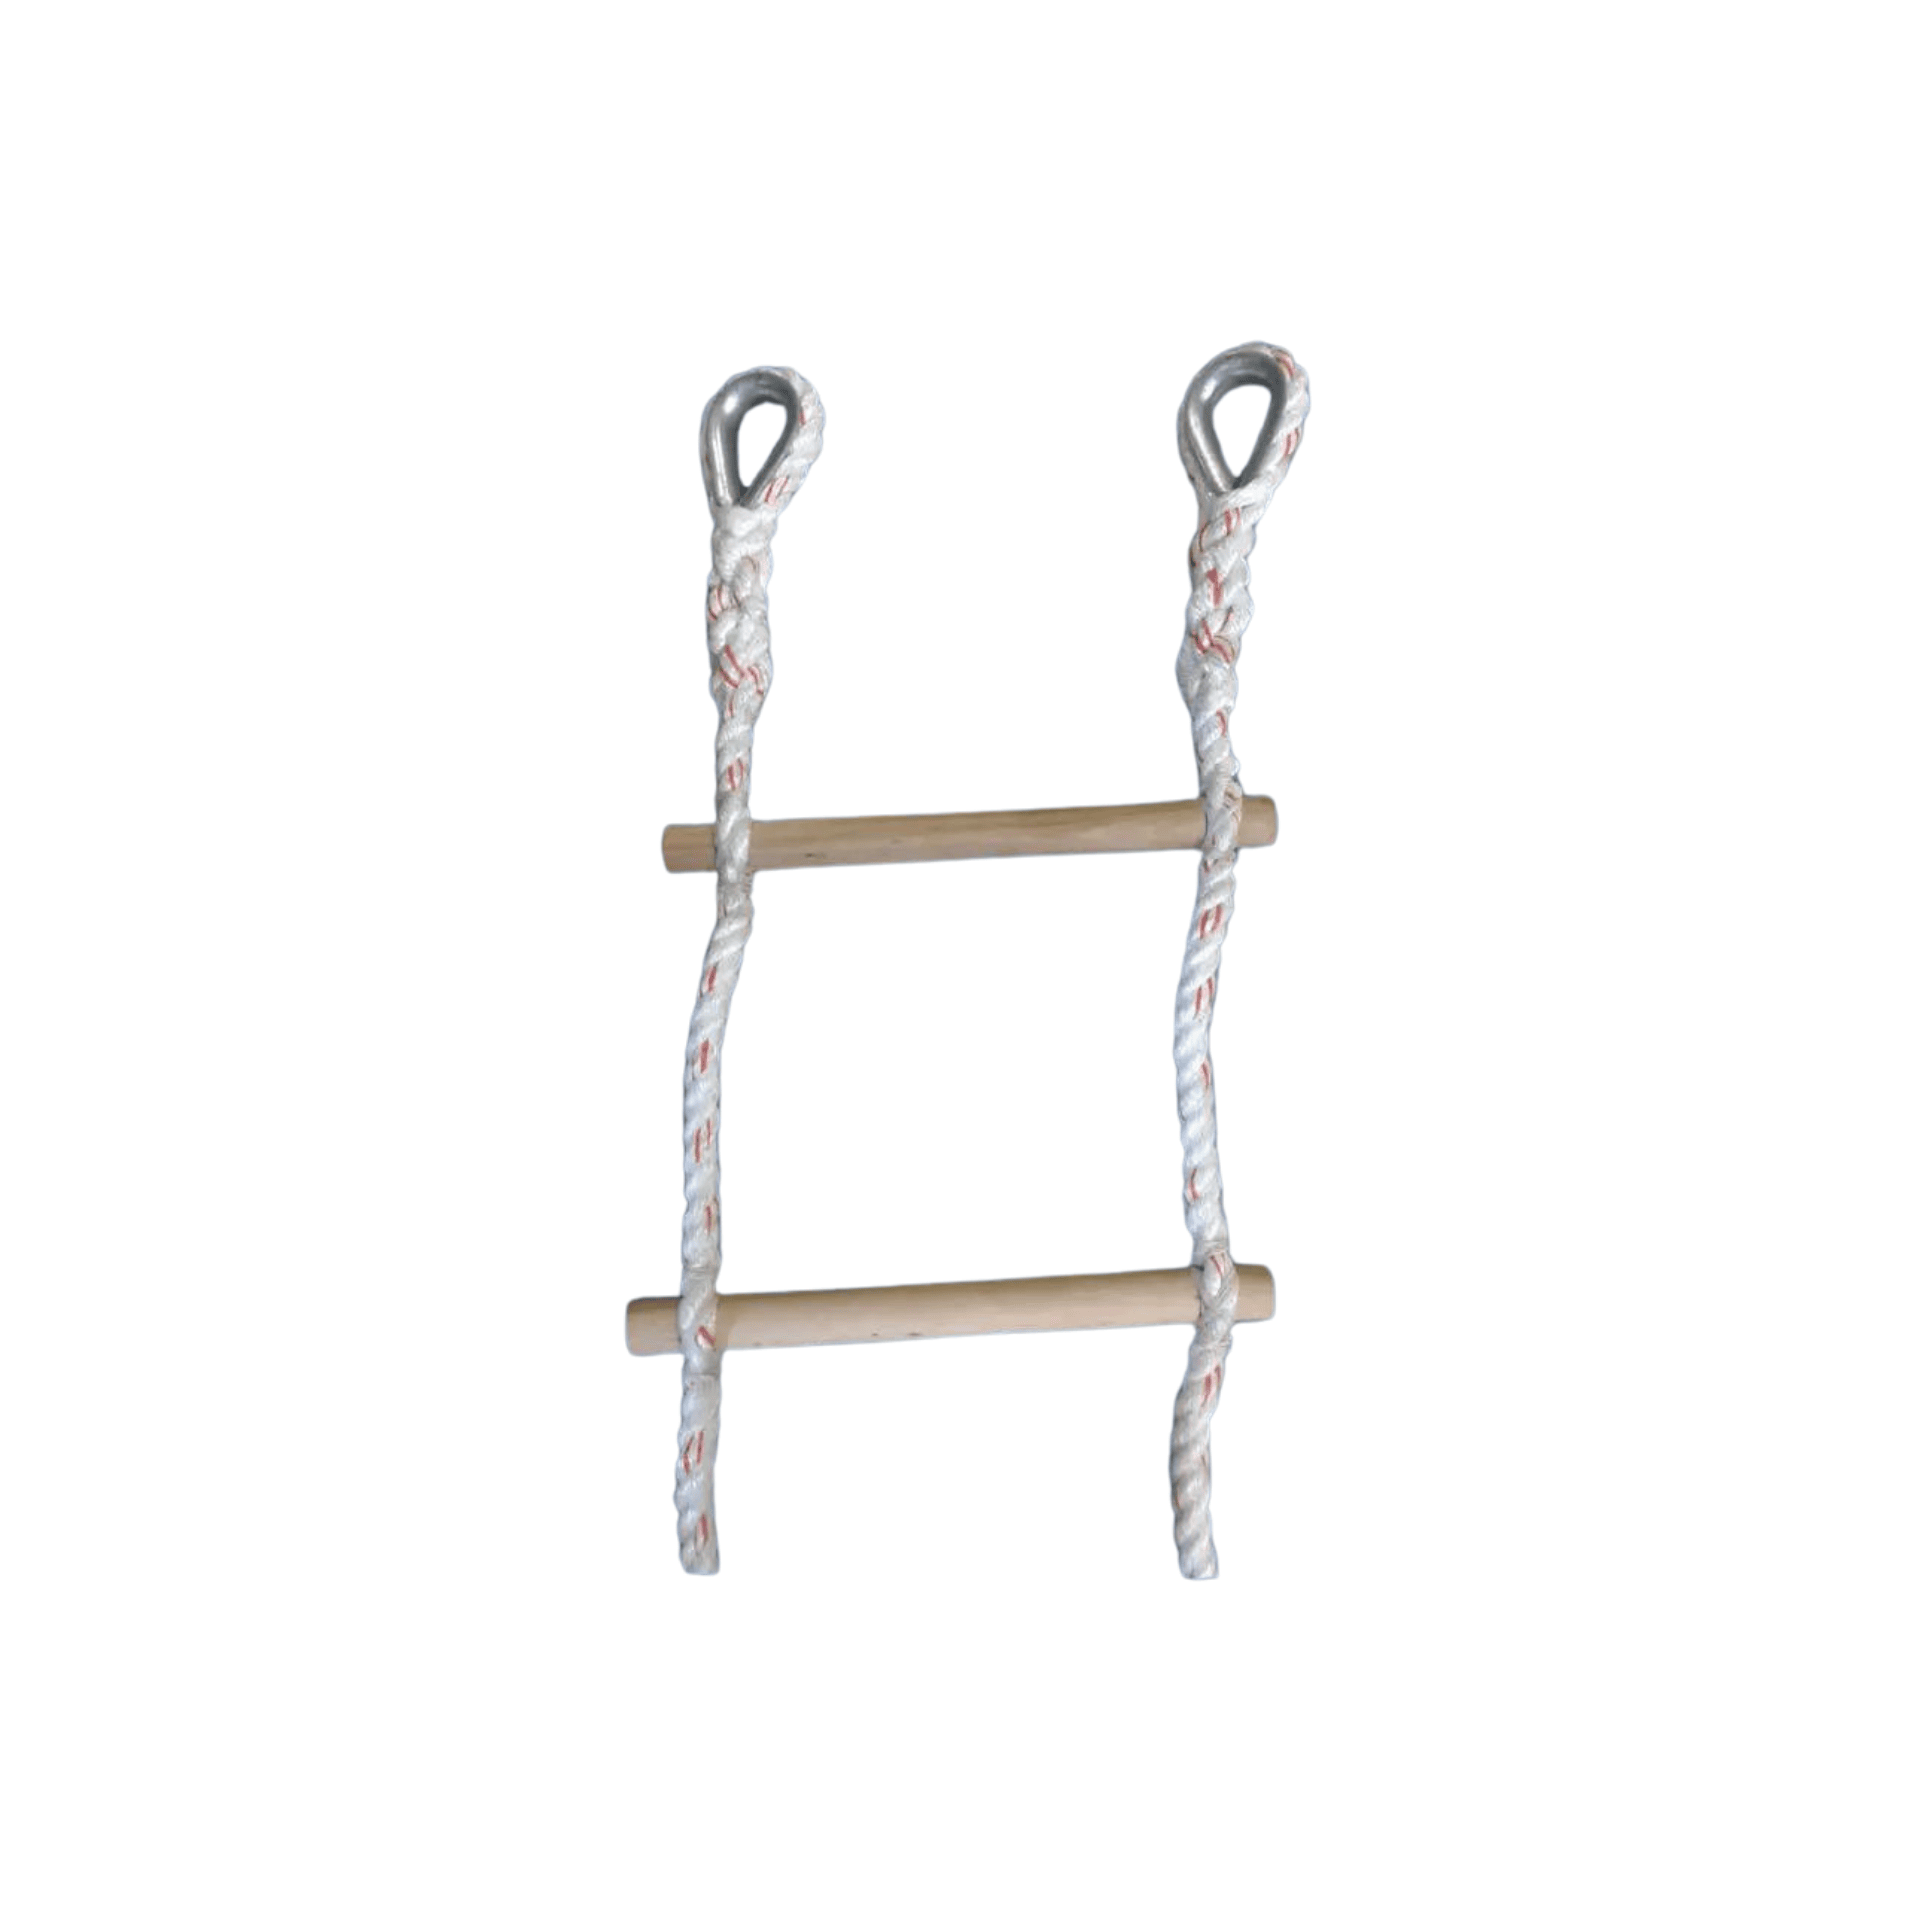 Rope Ladder for Tree House 15 ft / 5 m - ISOP Canada